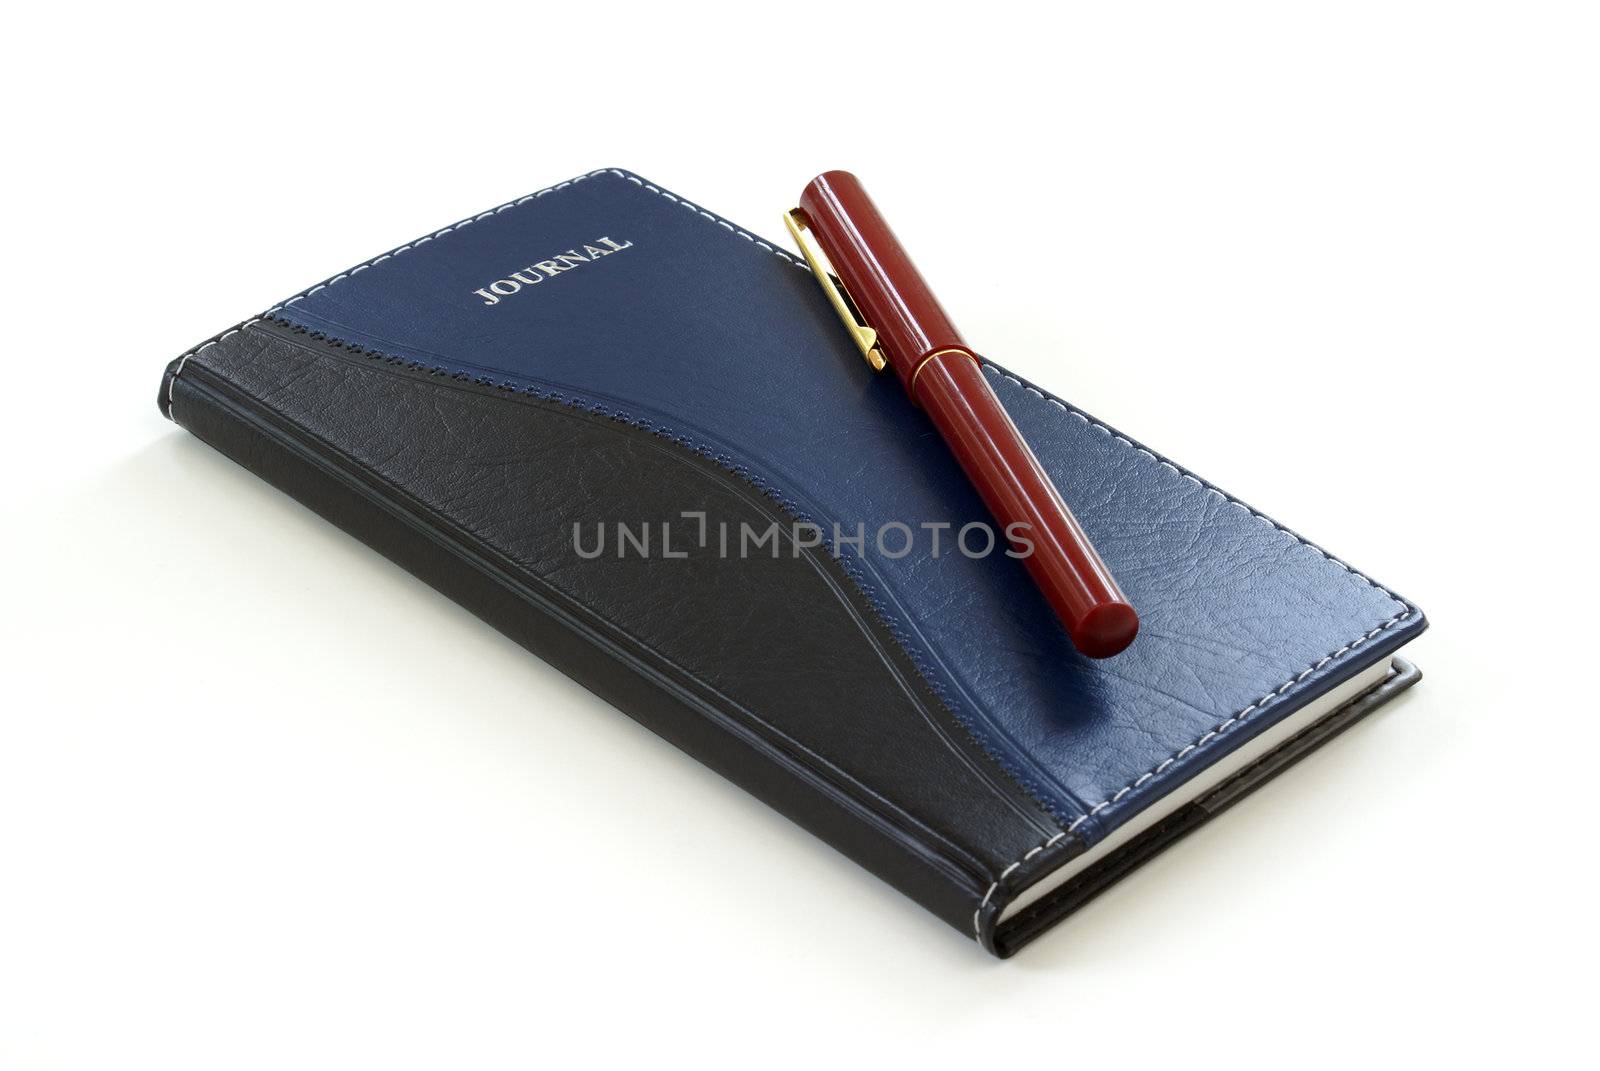 A pen sits on a leather journal.